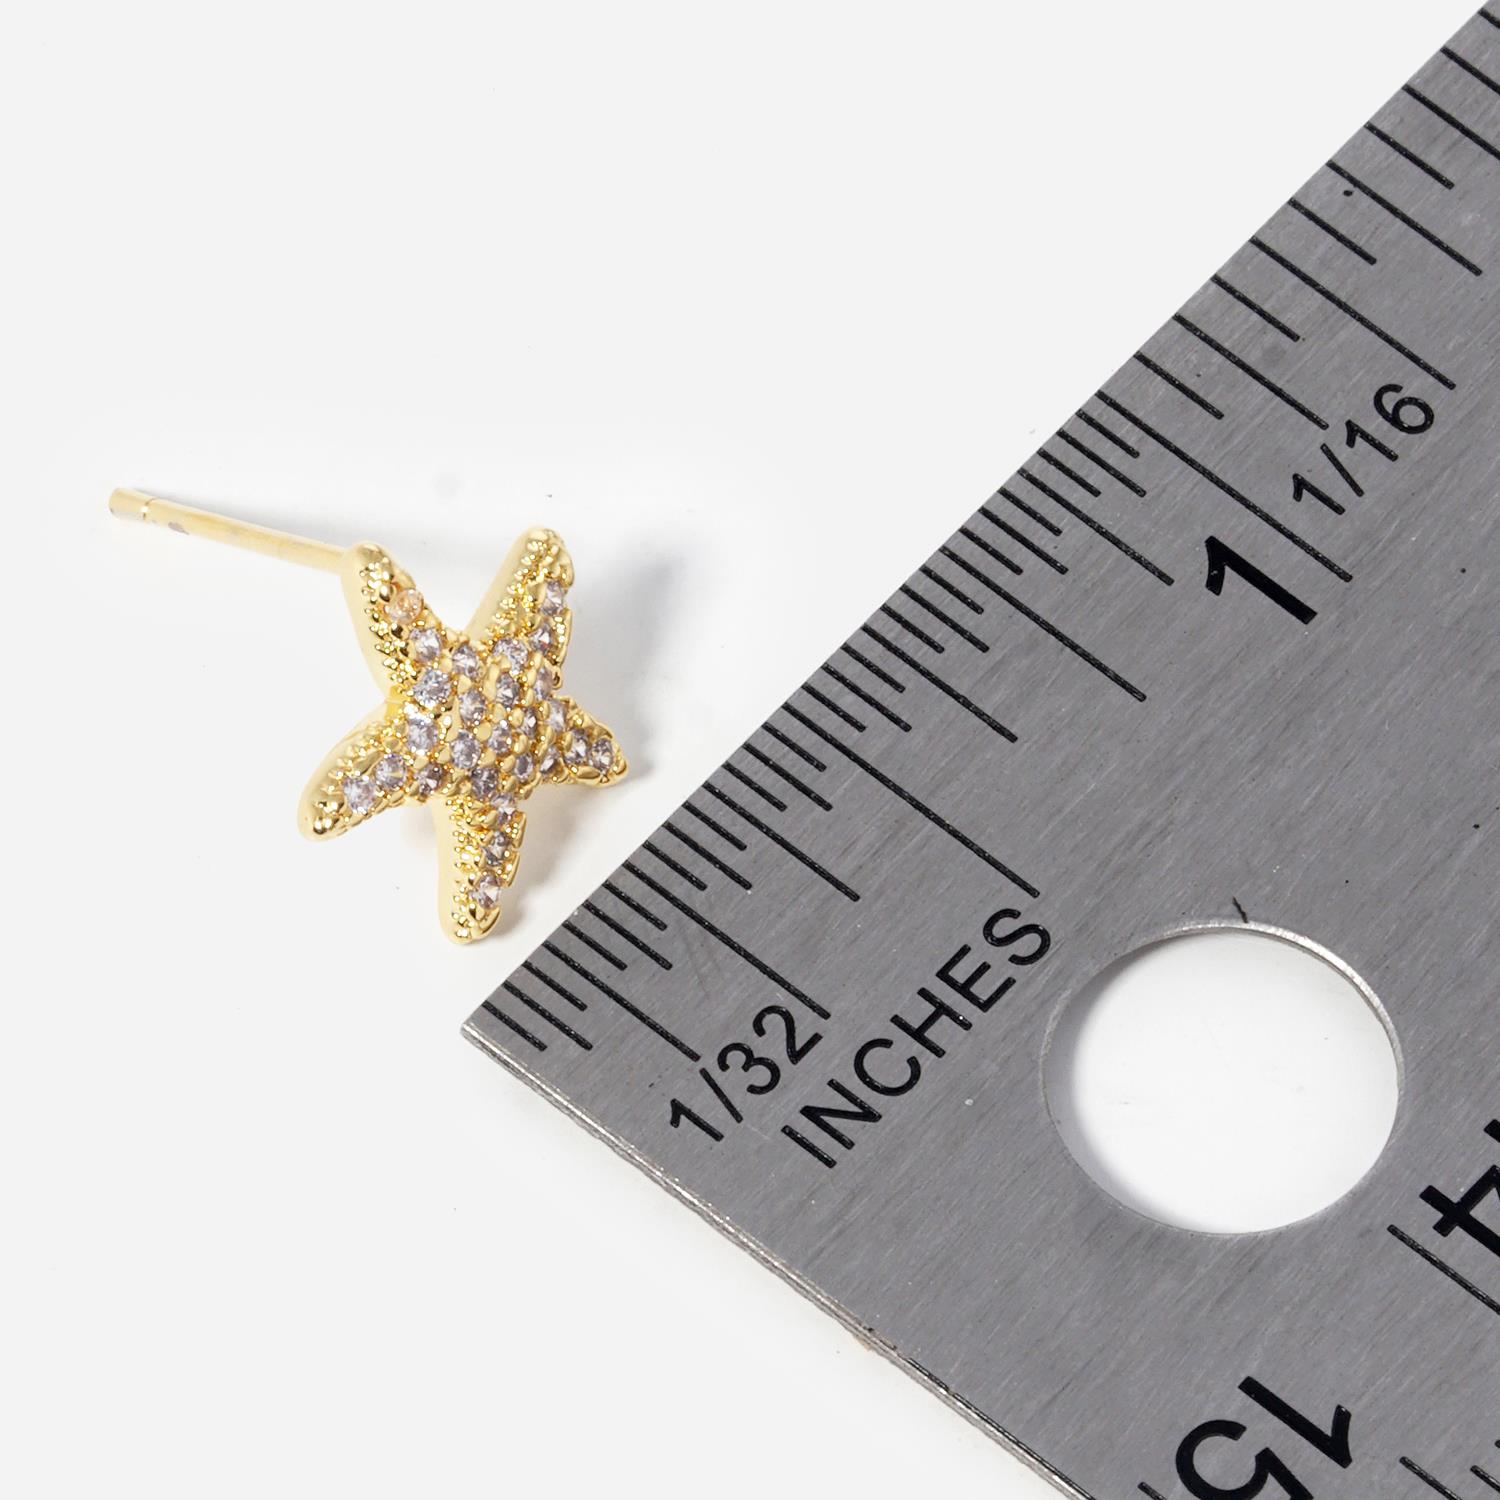 GOLD DIPPED CUBIC ZIRCONIA STAR STUD EARRING